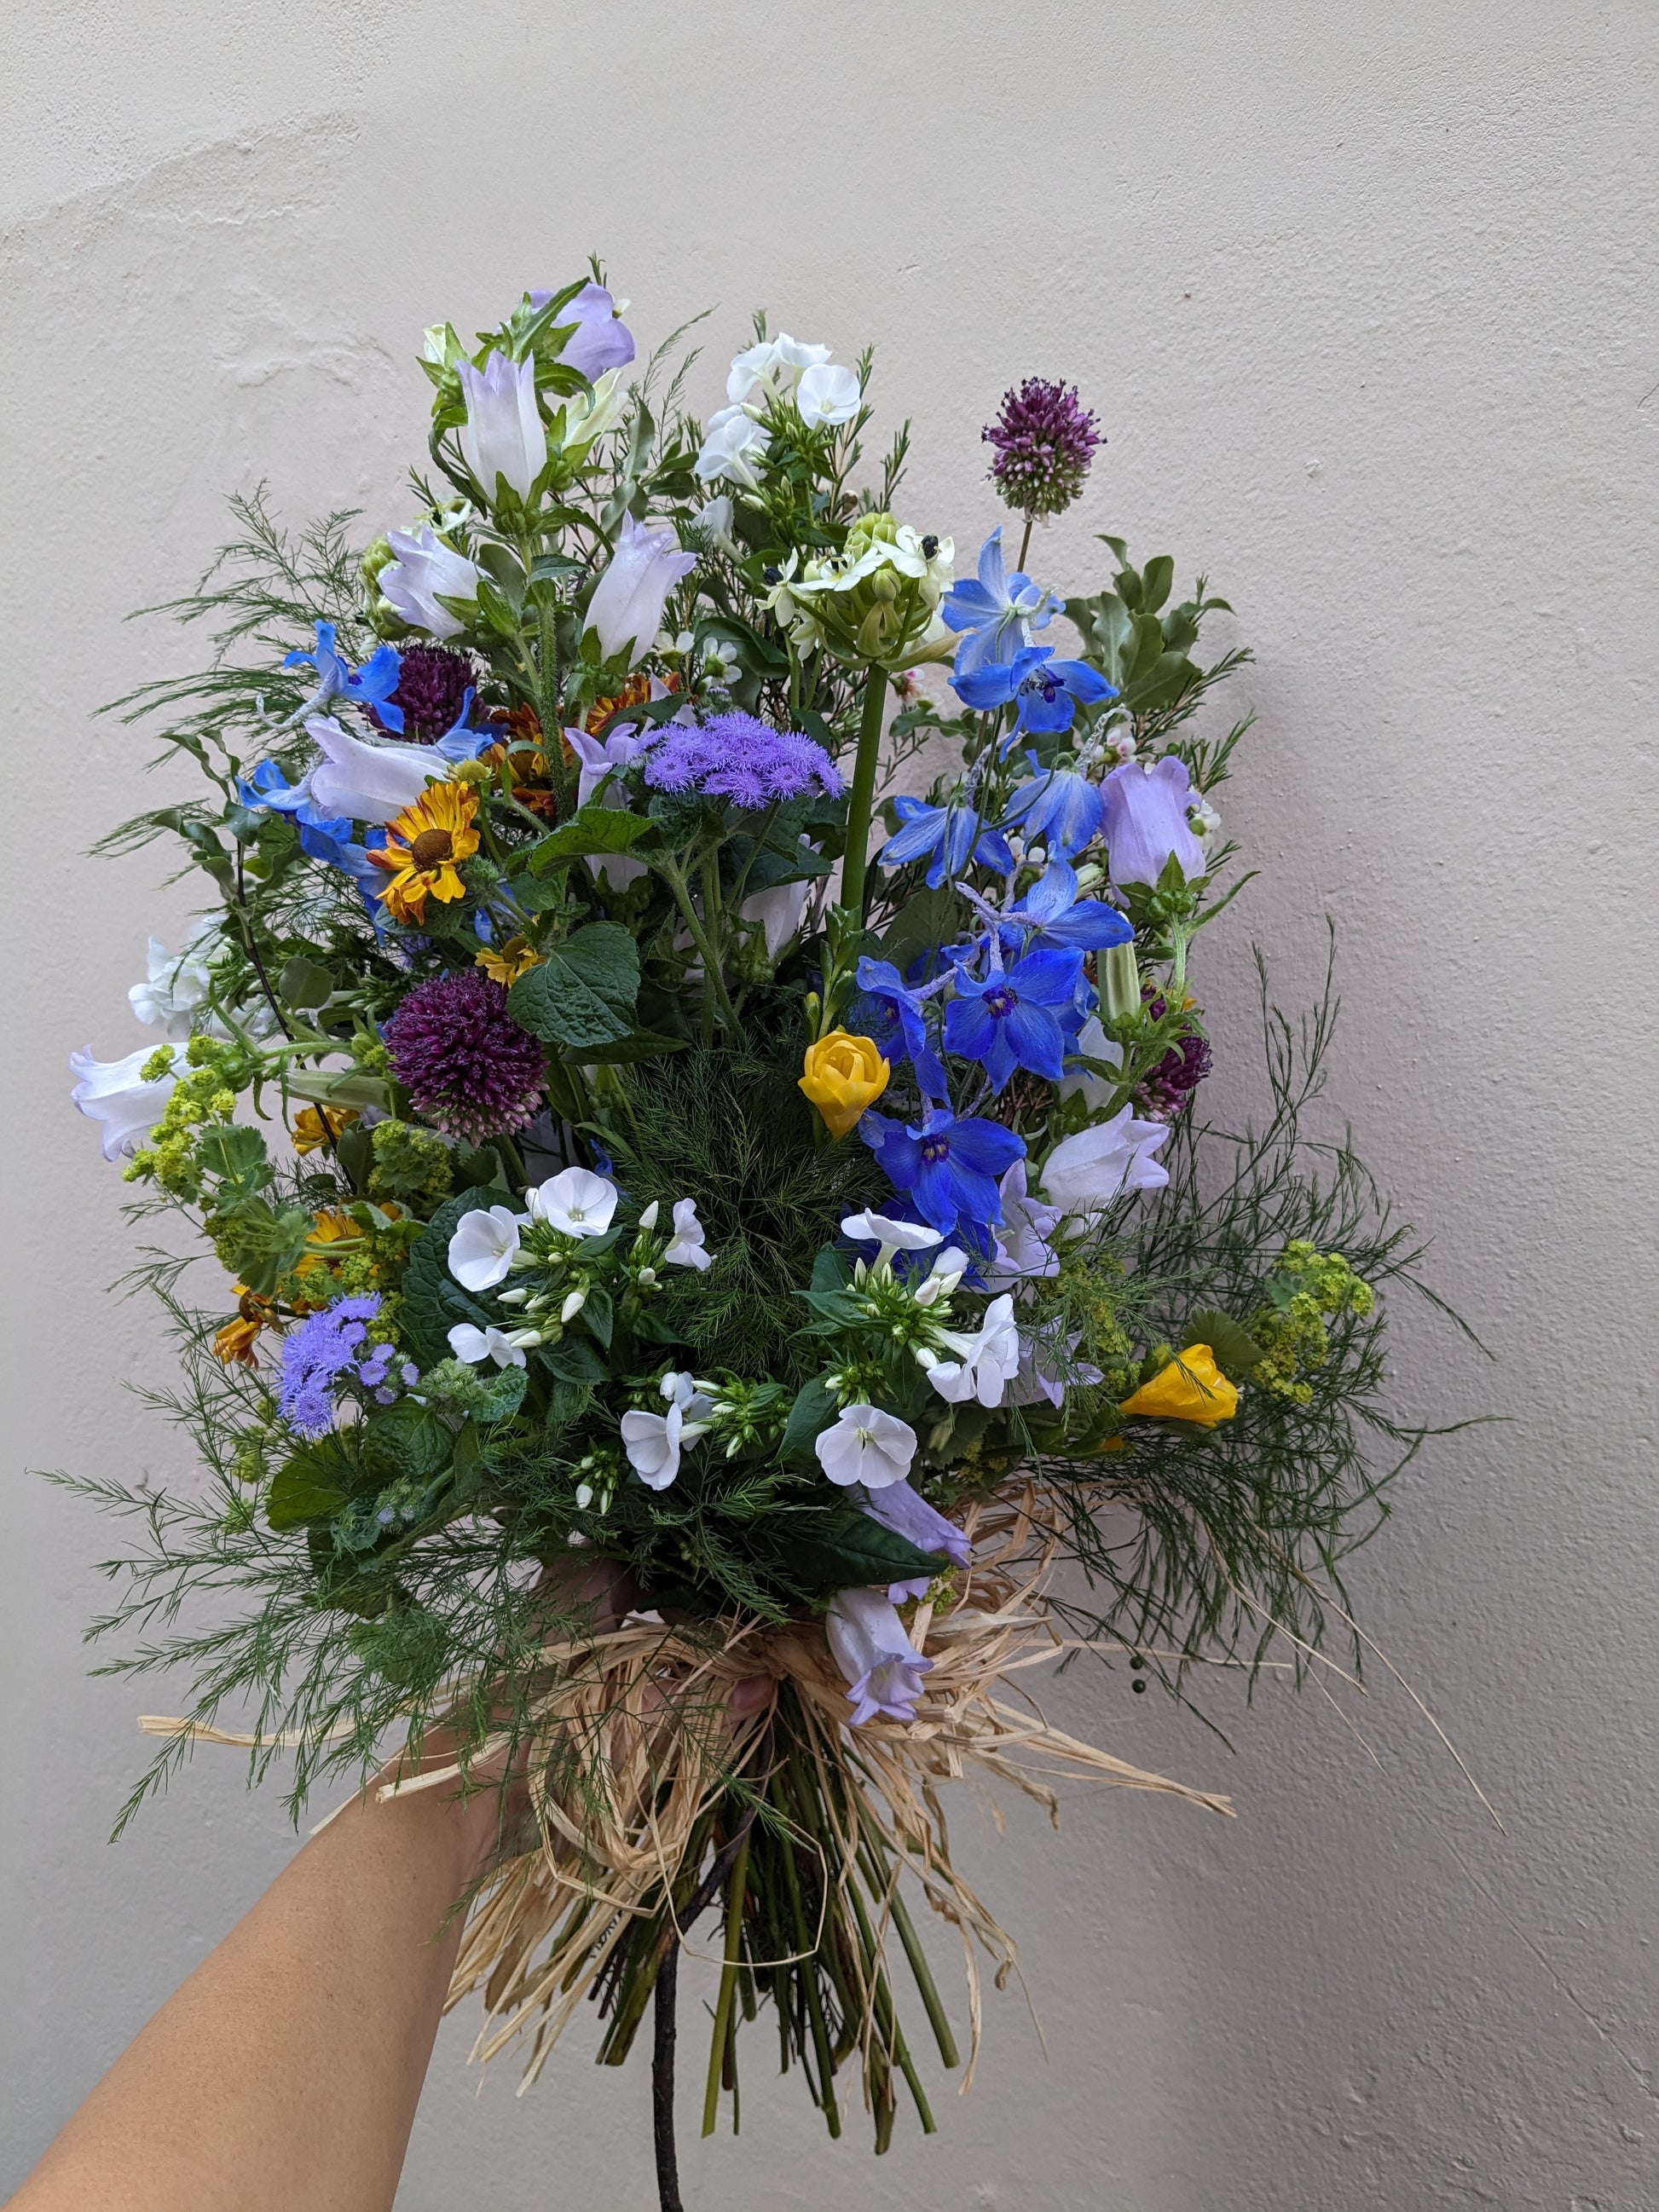 Tied Sheaf - Quality Flowers from Ann's Flowers - Just £36.95! Shop now at Ann's Flowers